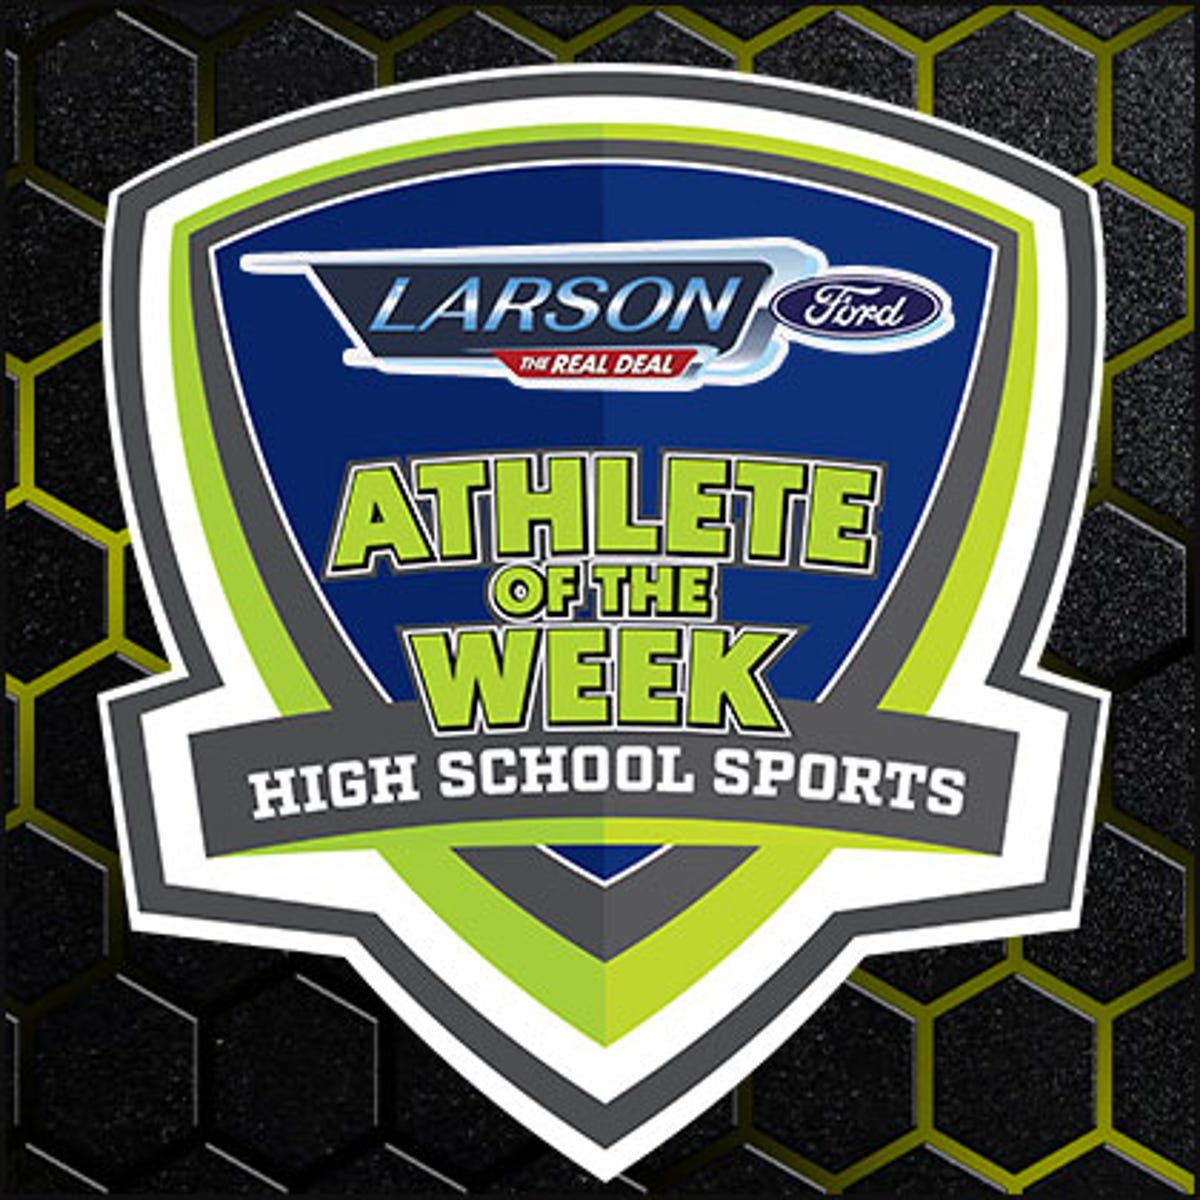 Vote for the Larson Ford Shore Baseball Player of the Week for Week 6